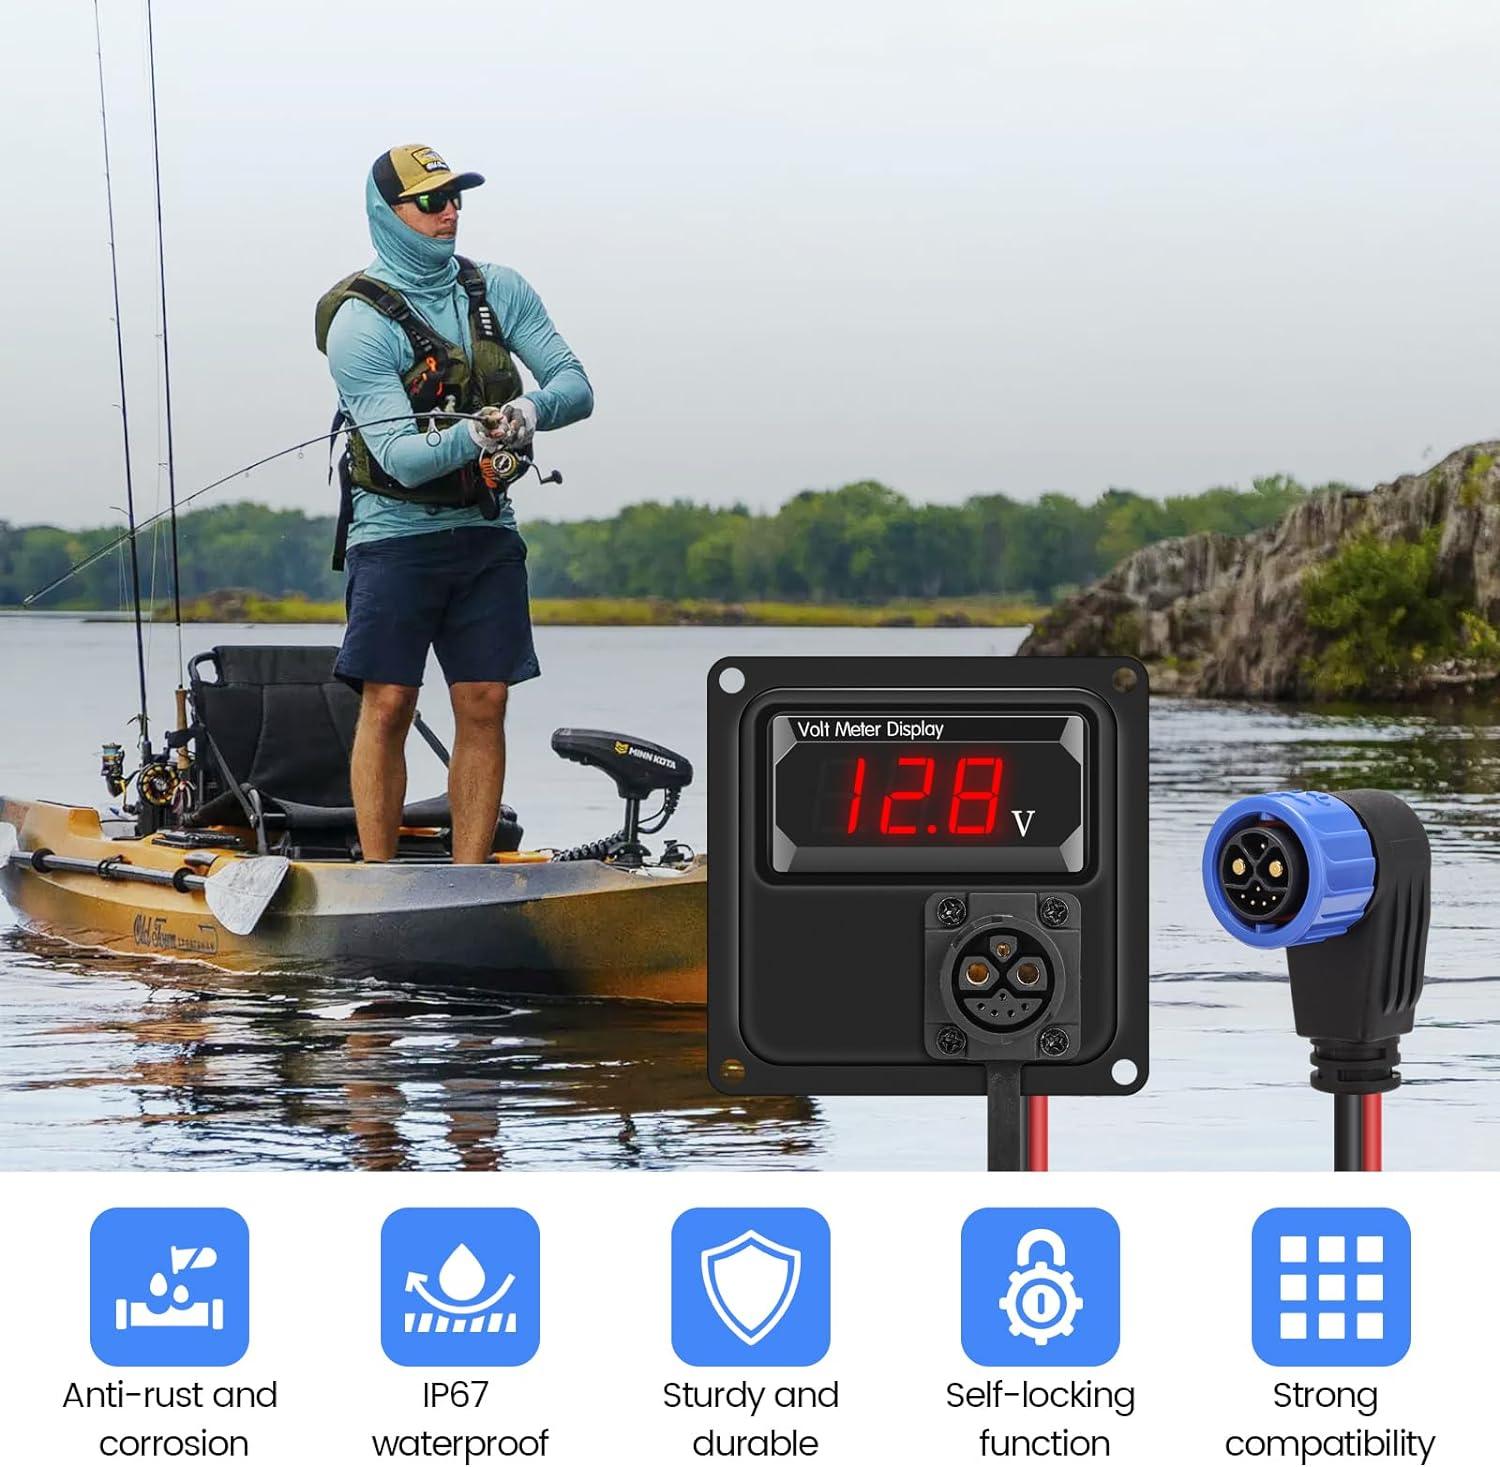 Battery Trolling Plug 12V/24V DC to DC Connector, Briidea Trolling Motor Plug with Battery Voltage Meter (8-30V), Easier Operation, Superior Anti-rust and Corrosion for Freshwater and Saltwater - briidea